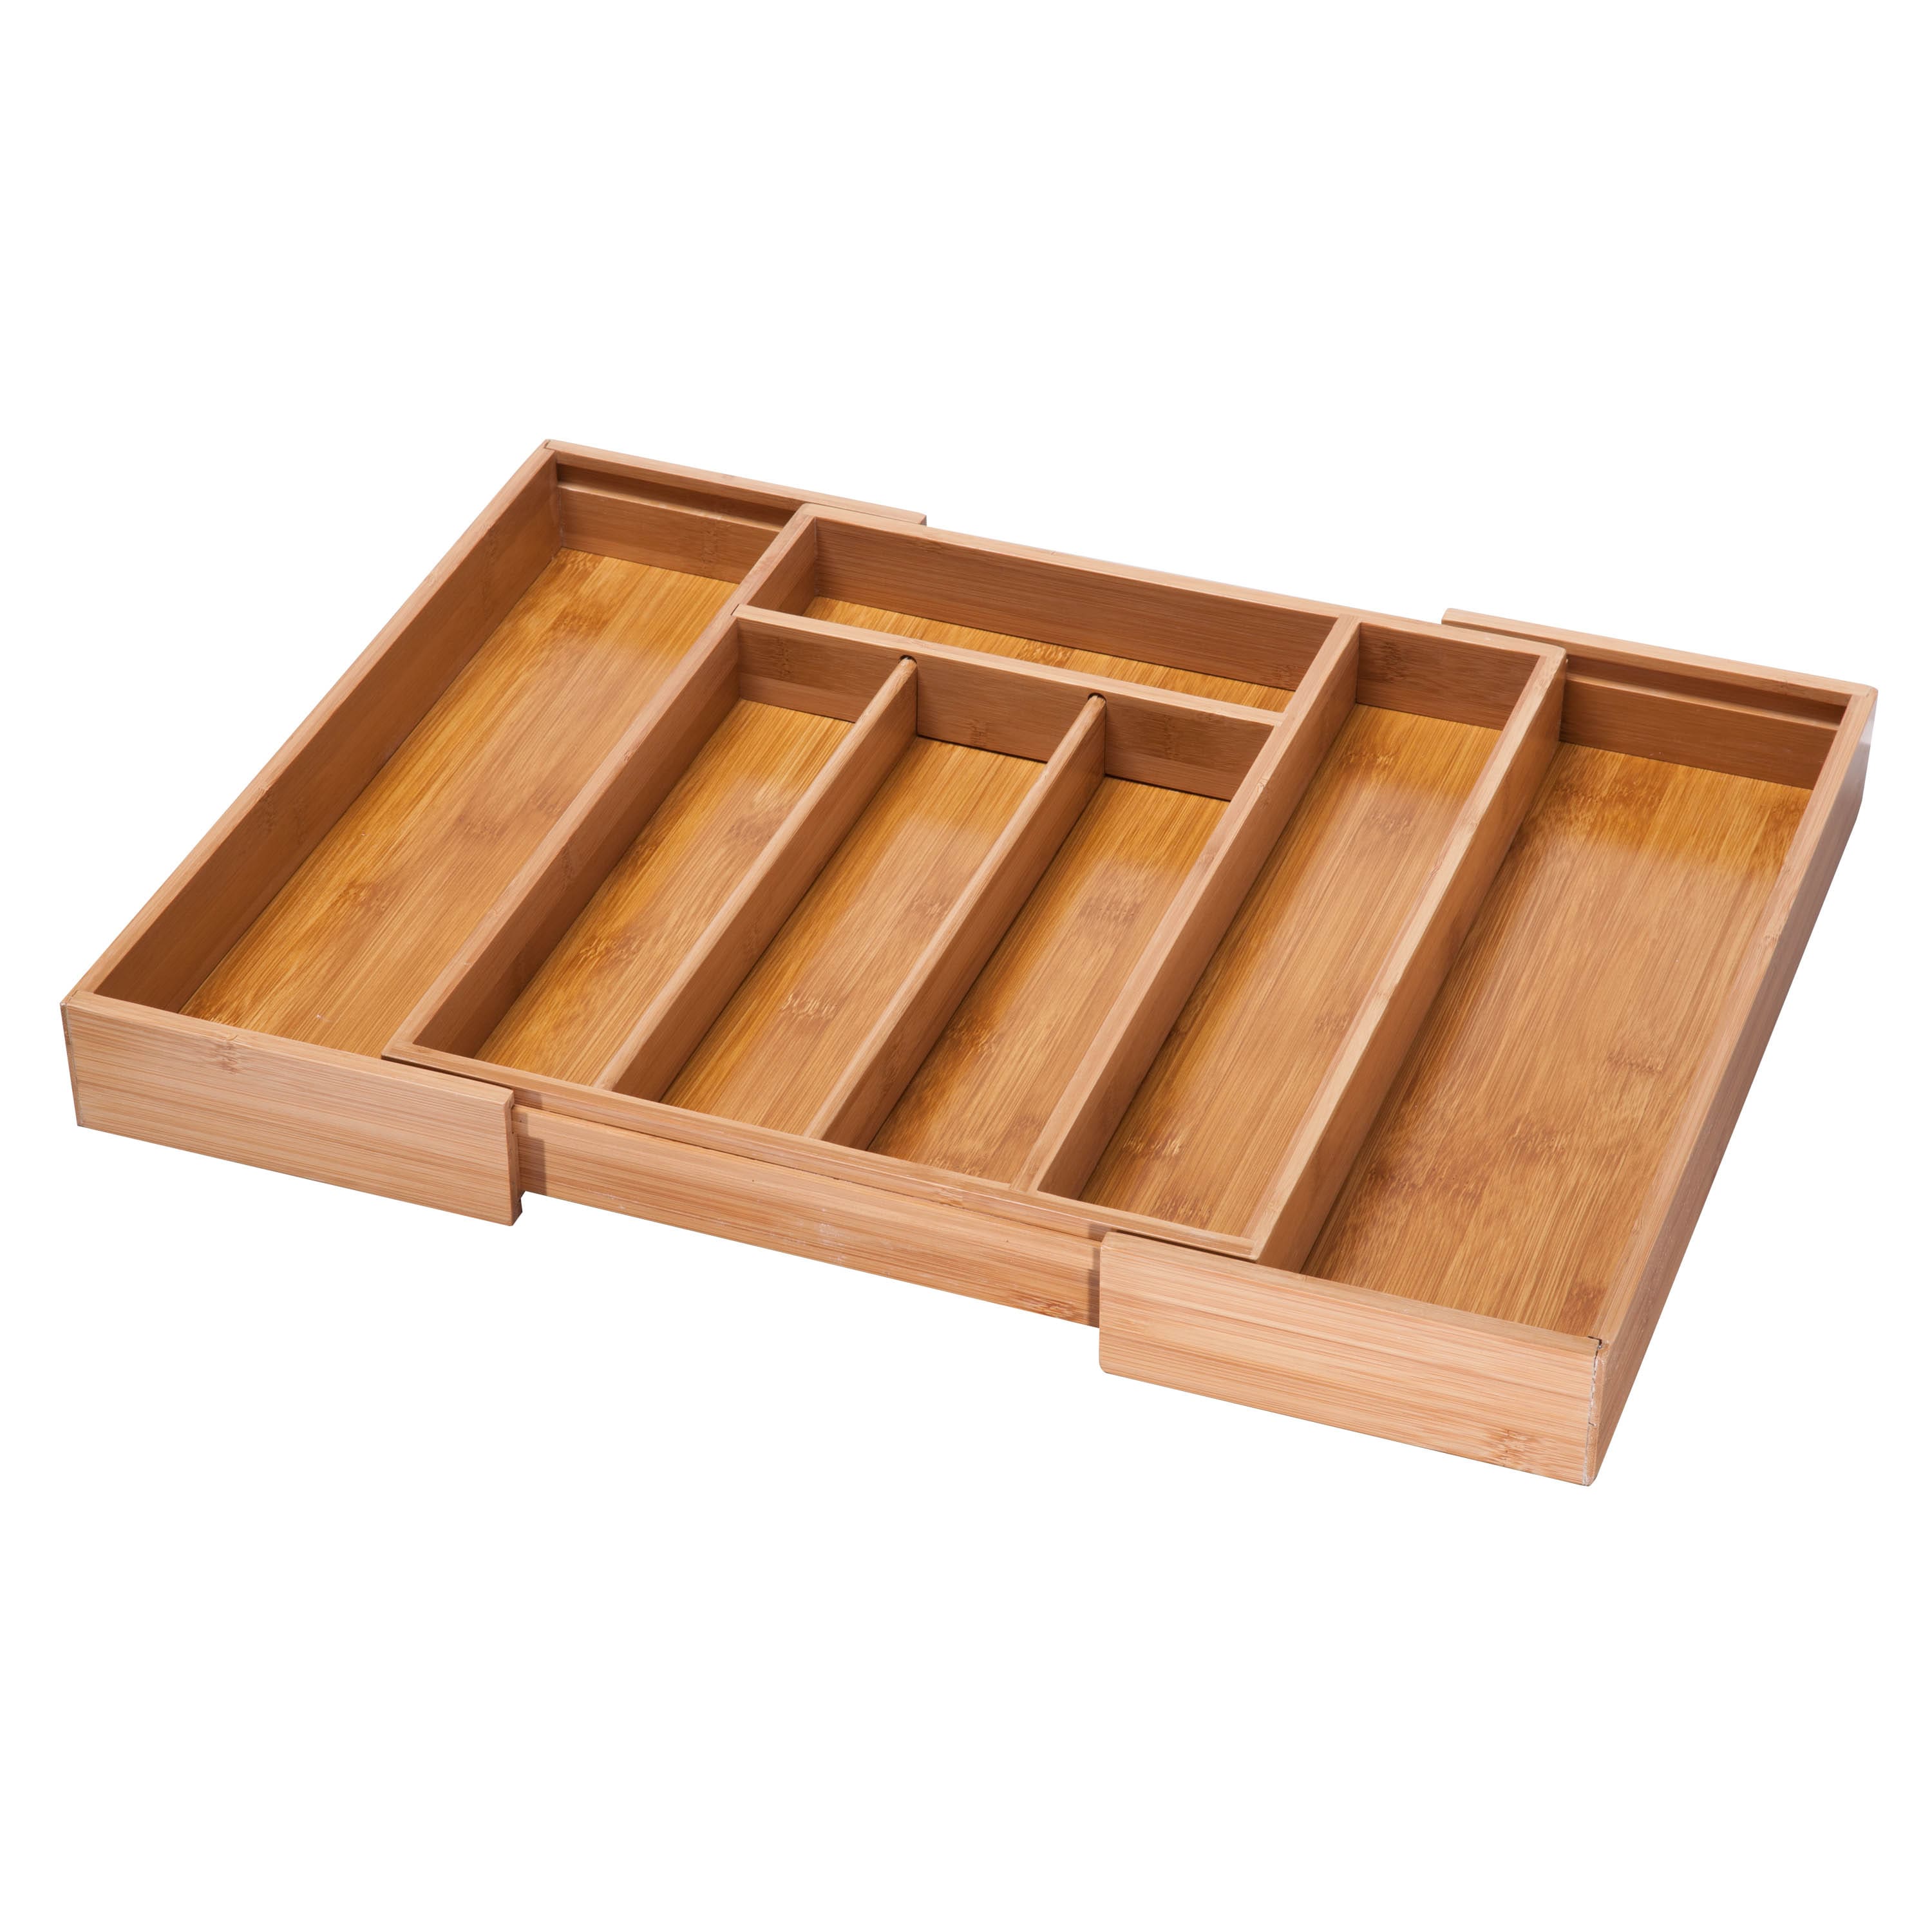 Honey-Can-Do Bamboo 17" D x 22.75" W x 2.3" 7-Compartment Expandable Kitchen Drawer Organizer, Natural - image 2 of 7